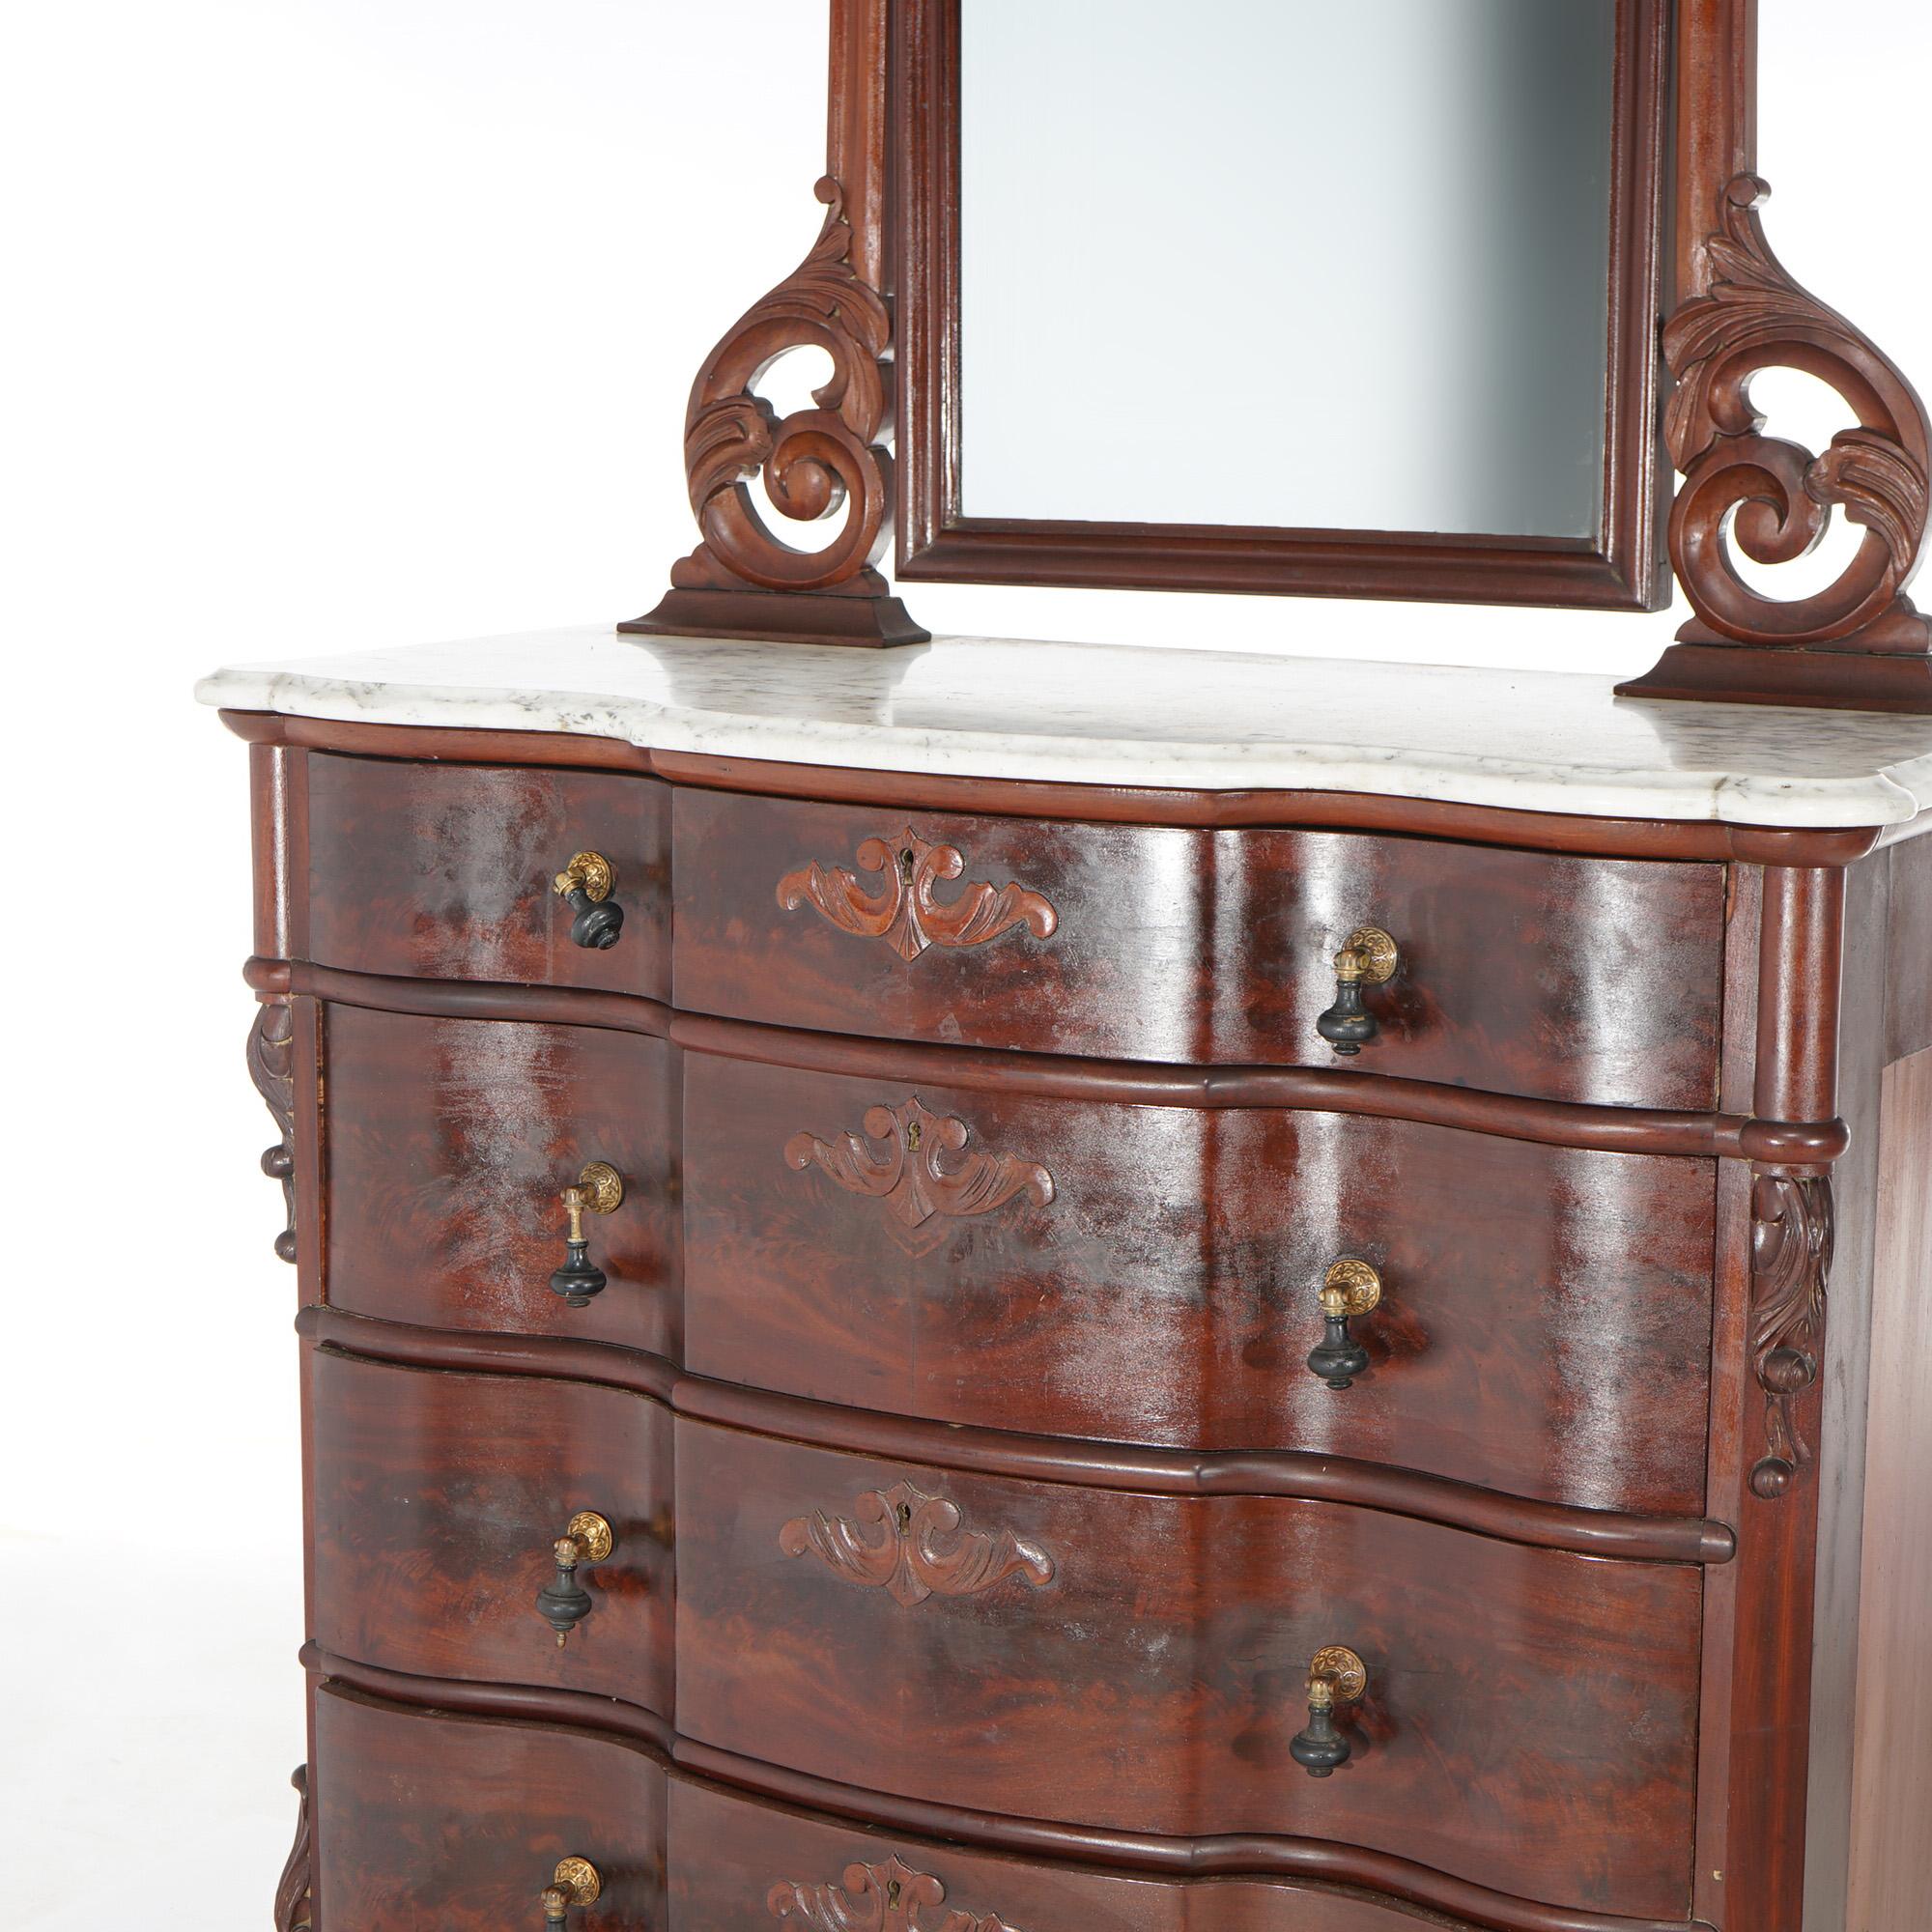 Antique Victorian Flame Mahogany Swell Front Mirrored Chest of Drawers c1860 For Sale 7